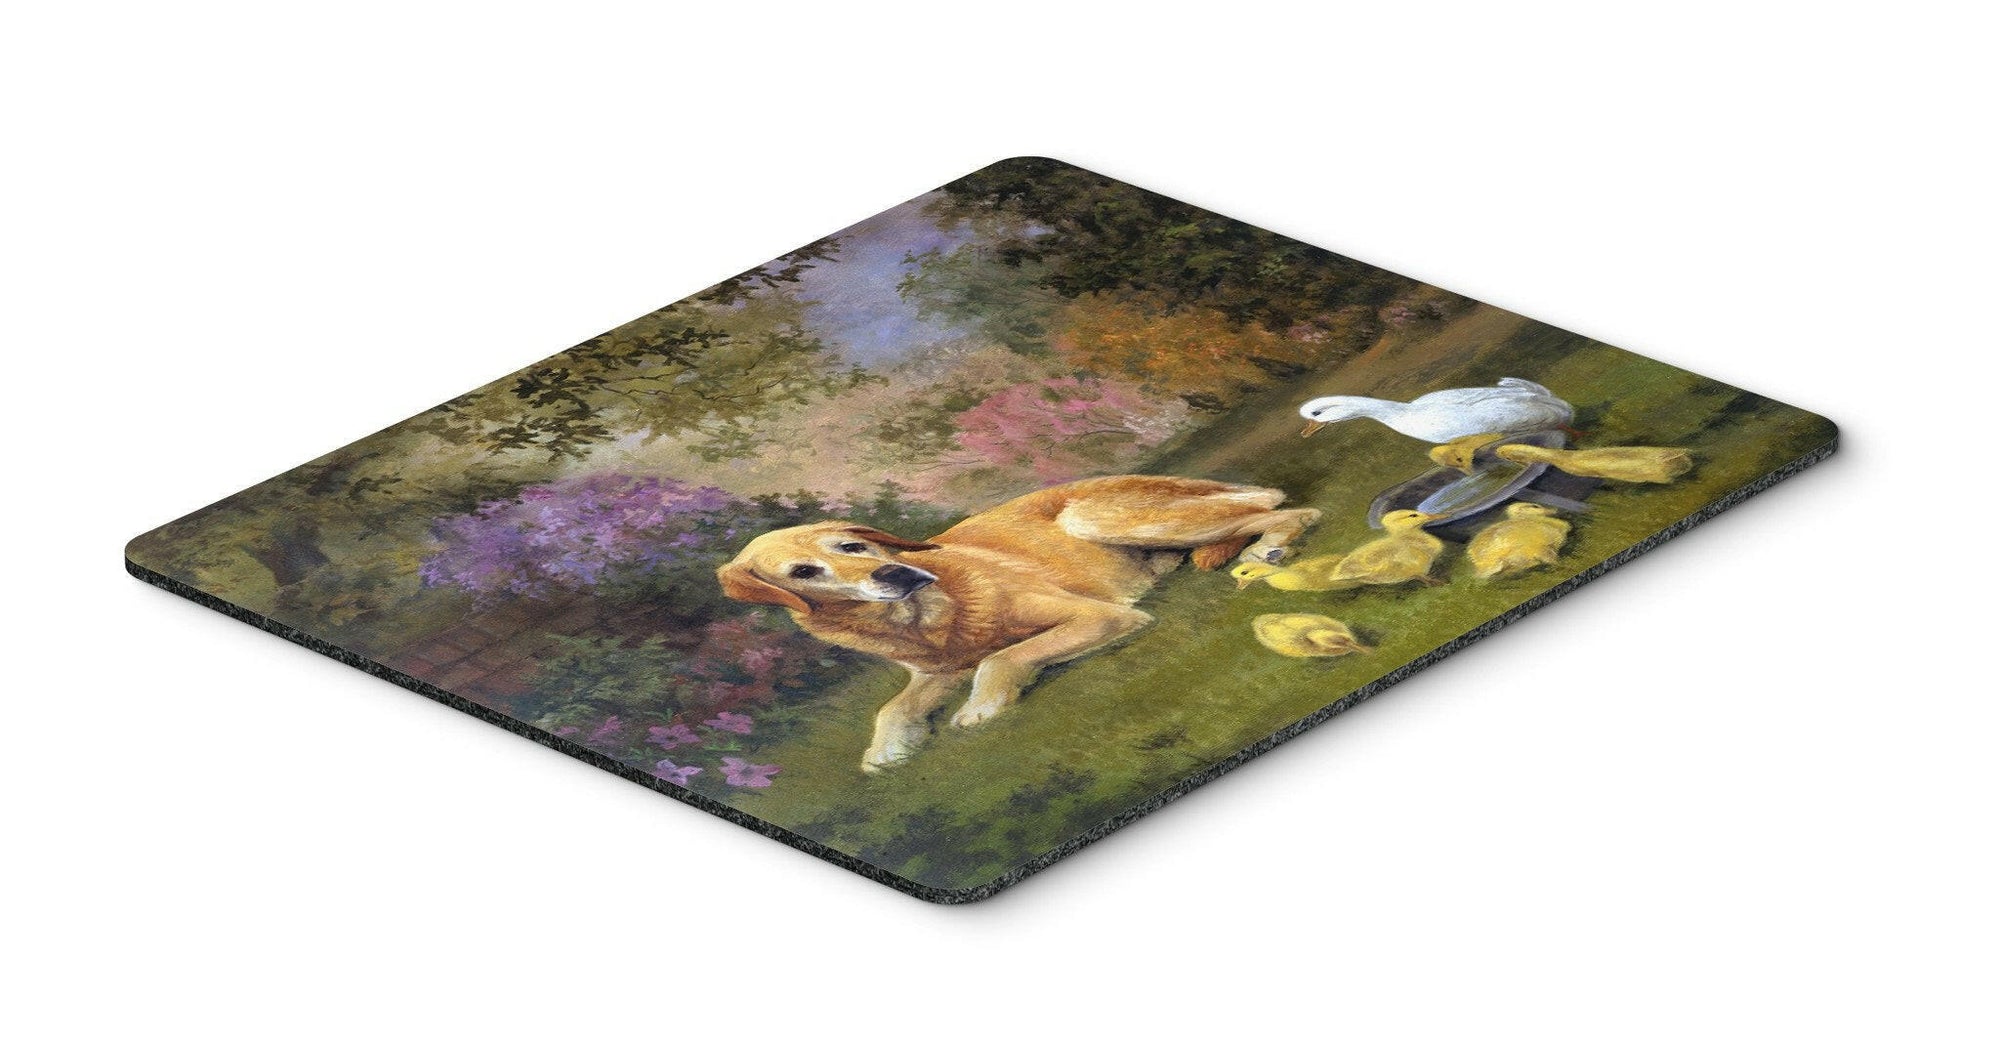 Yellow Labrador and Chicks Mouse Pad, Hot Pad or Trivet HEH0096MP by Caroline's Treasures